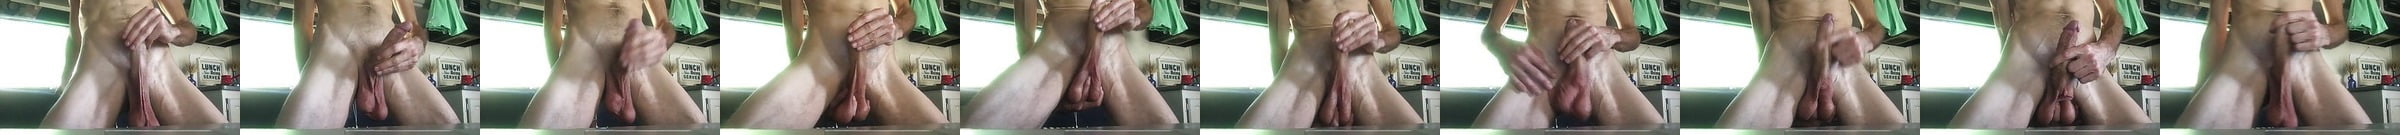 Long Big Fat Thick Cock And Balls Shaved Soft Cock Gay Xhamster